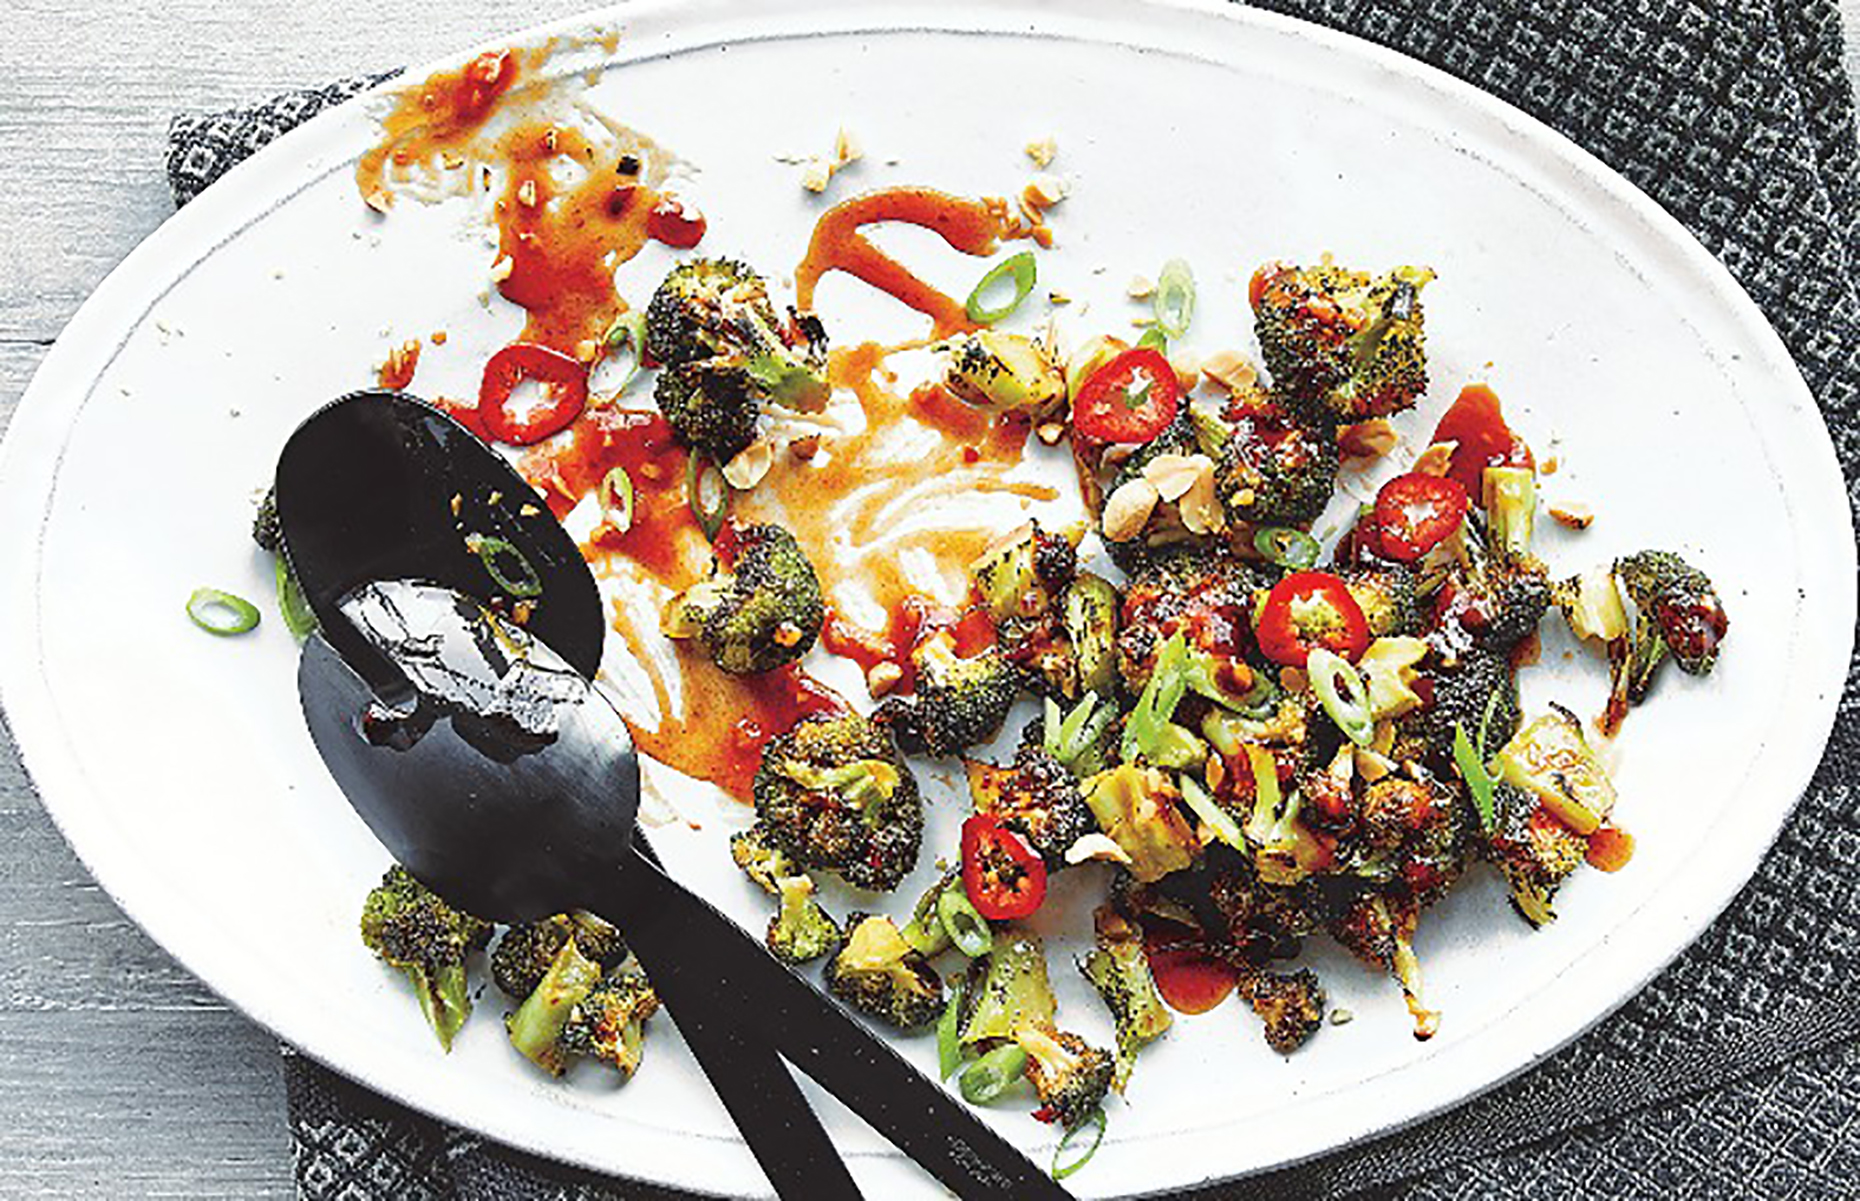 Kung pao roasted broccoli (Image: Cravings: Hungry for More/Michael Joseph)